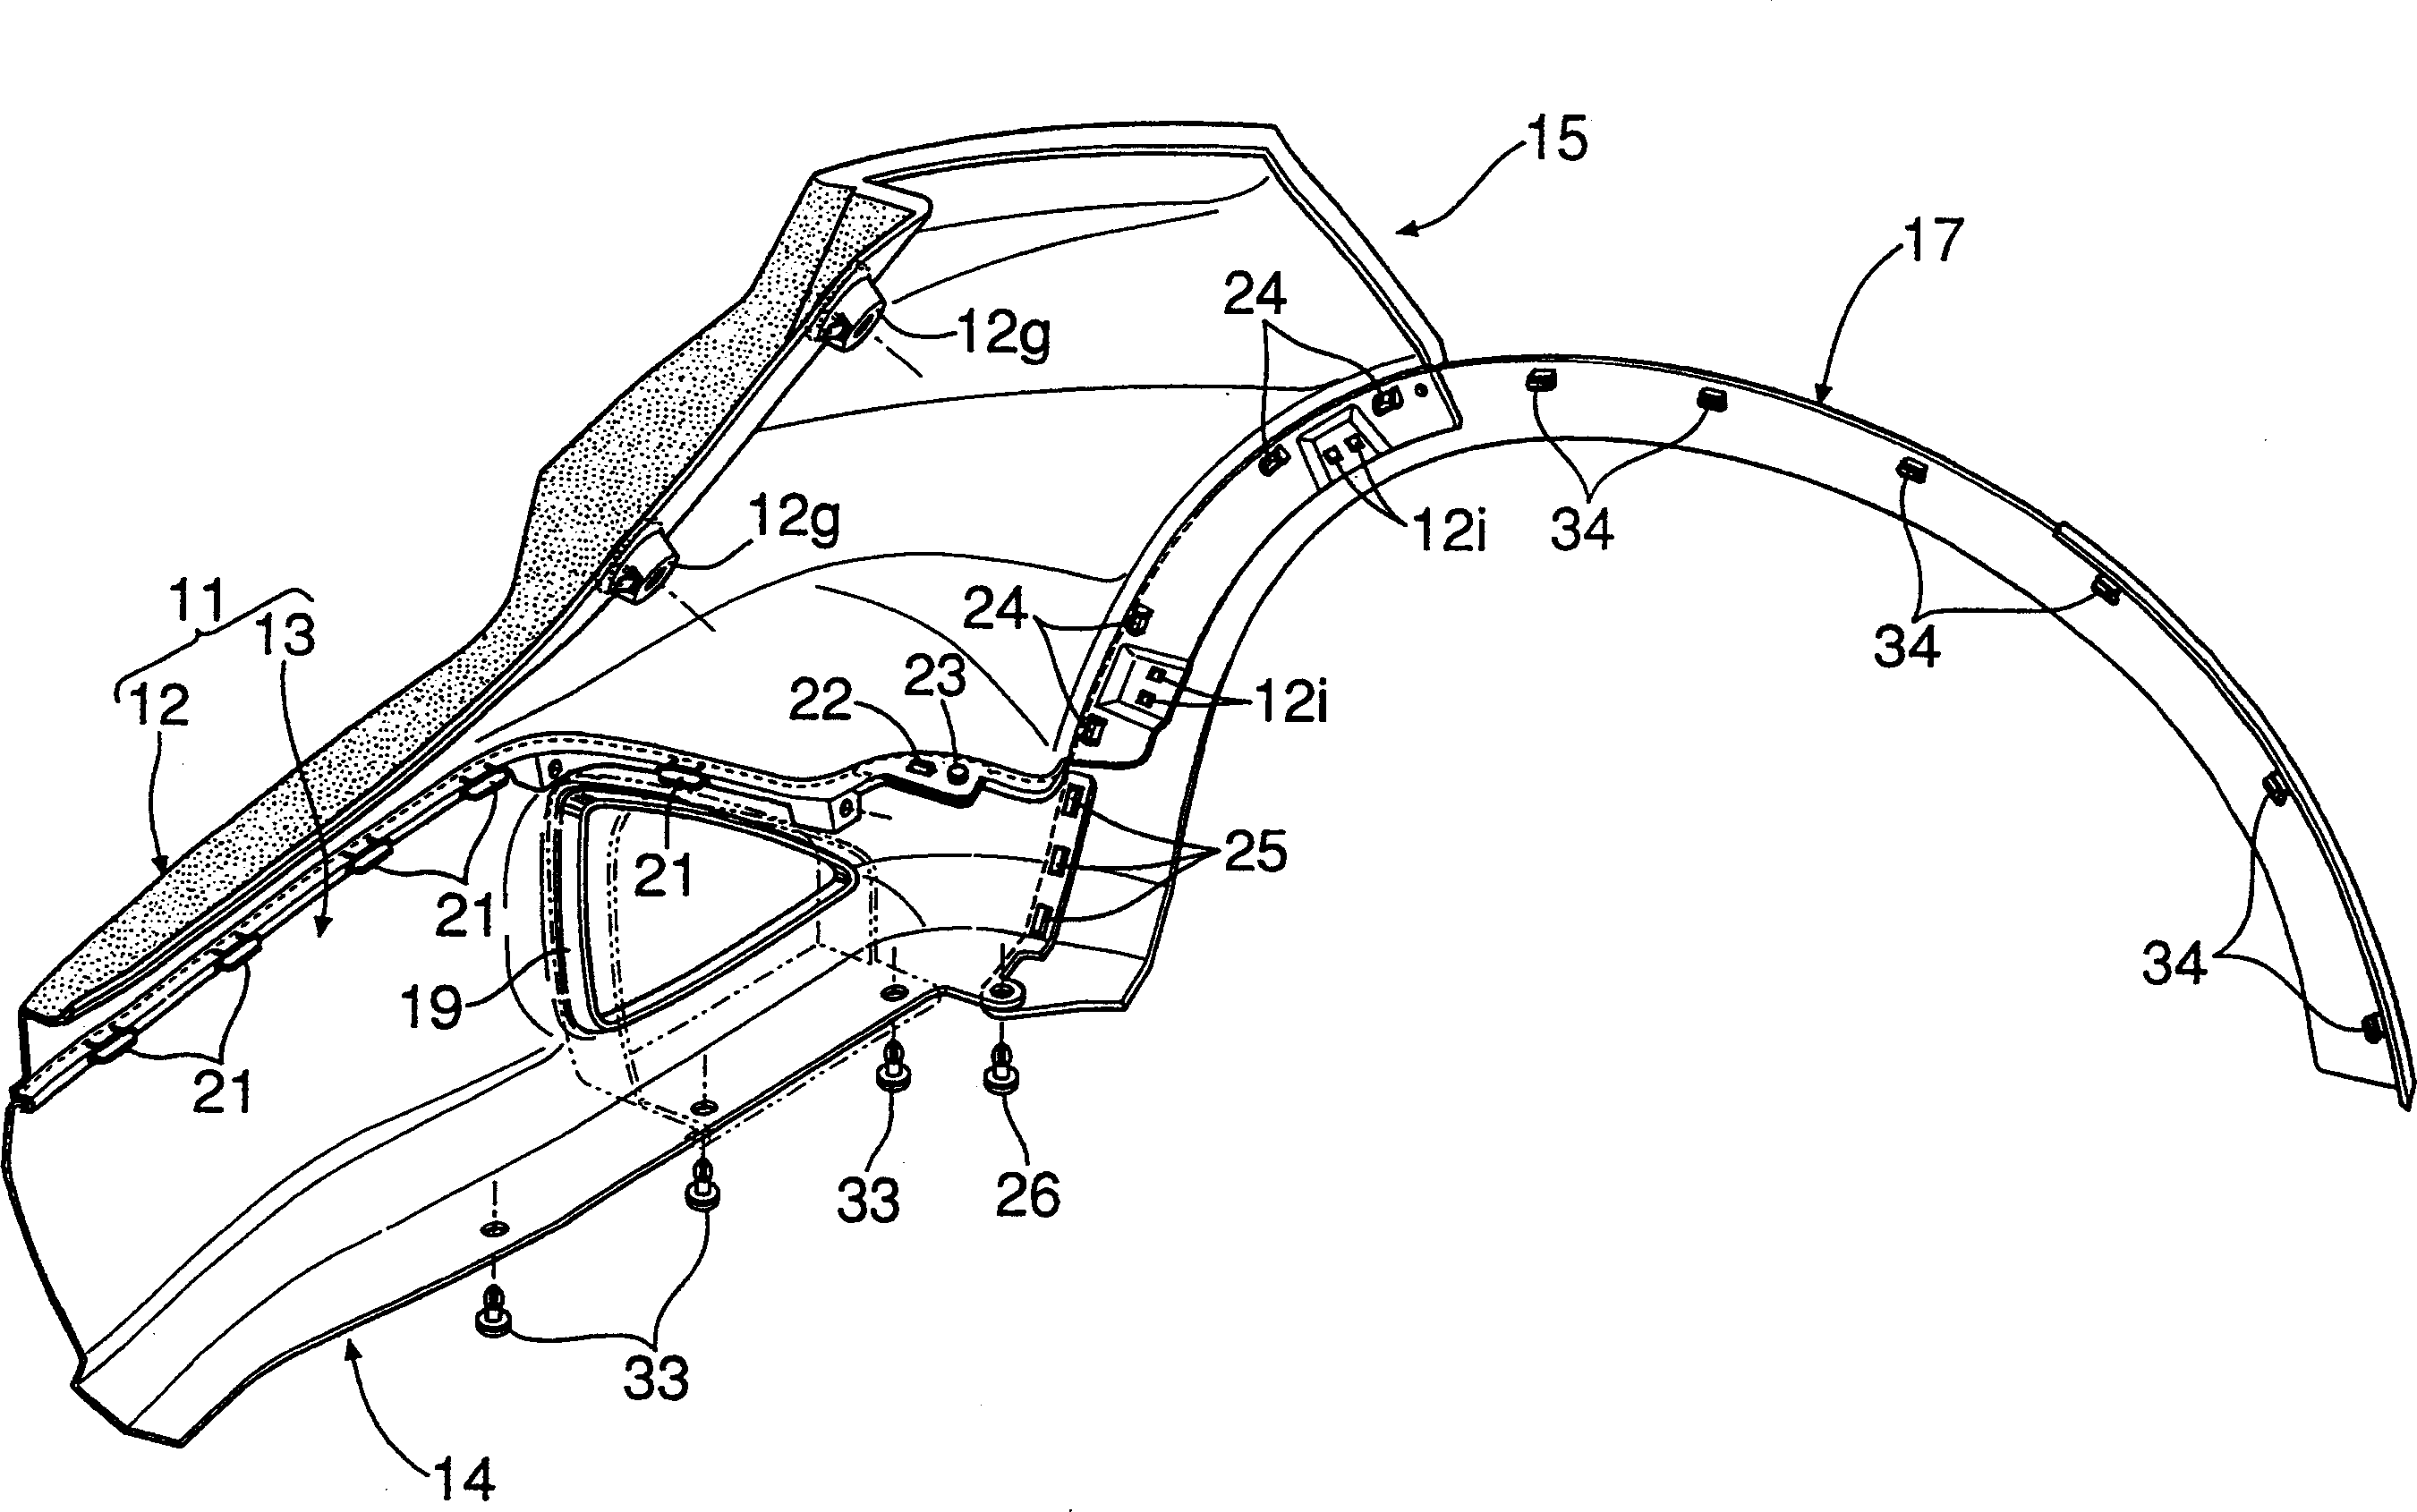 Structure for fixing wheel arch molding